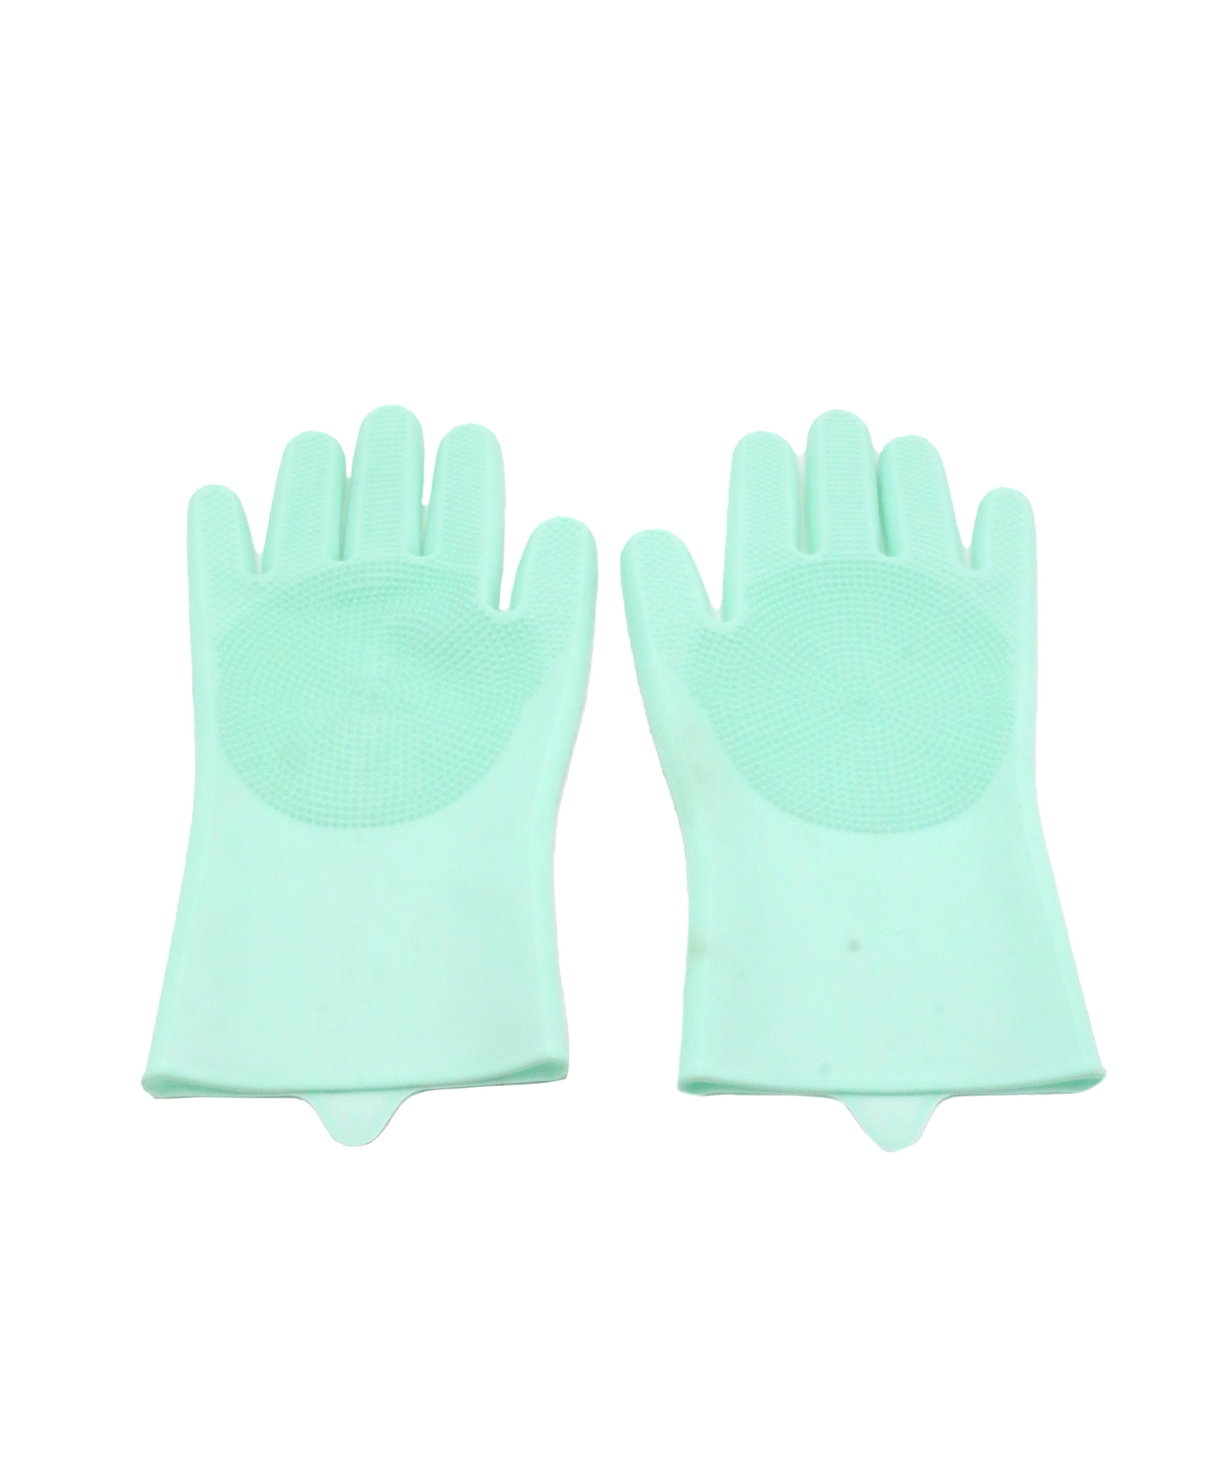 washing gloves rubber d623